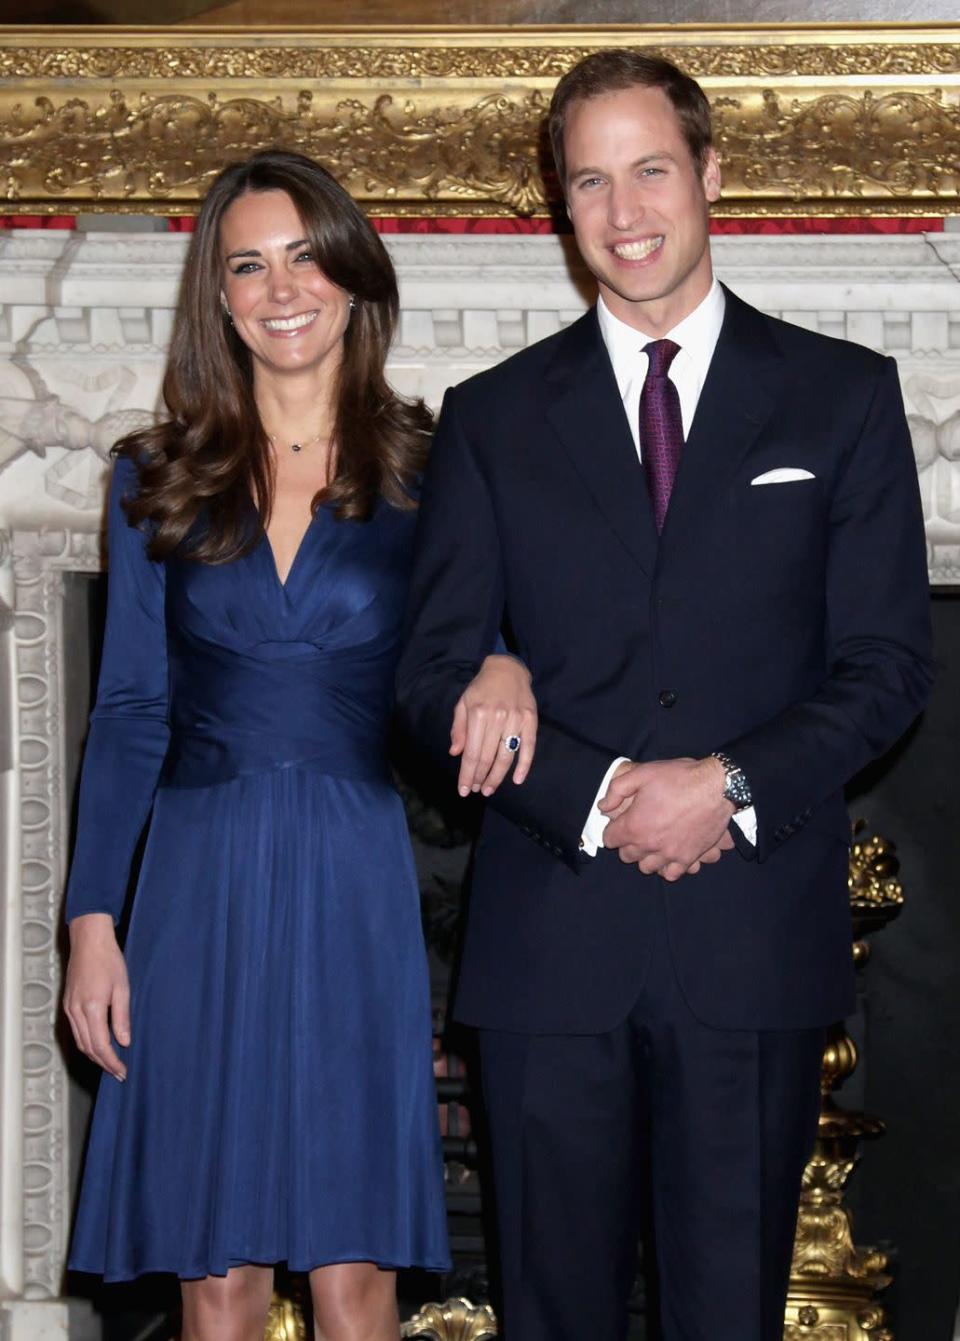 <p>Even royal couples have their ups and downs. The pair, who met in college, <a href="https://parade.com/152491/alexandra-hurtado/why-william-and-kate-broke-up-in-2007-and-why-they-got-back-together/" rel="nofollow noopener" target="_blank" data-ylk="slk:split in 2007" class="link ">split in 2007</a>. The break was brief, they've been married since 2011, and now share three kids: George, Charlotte, and Louis. </p>